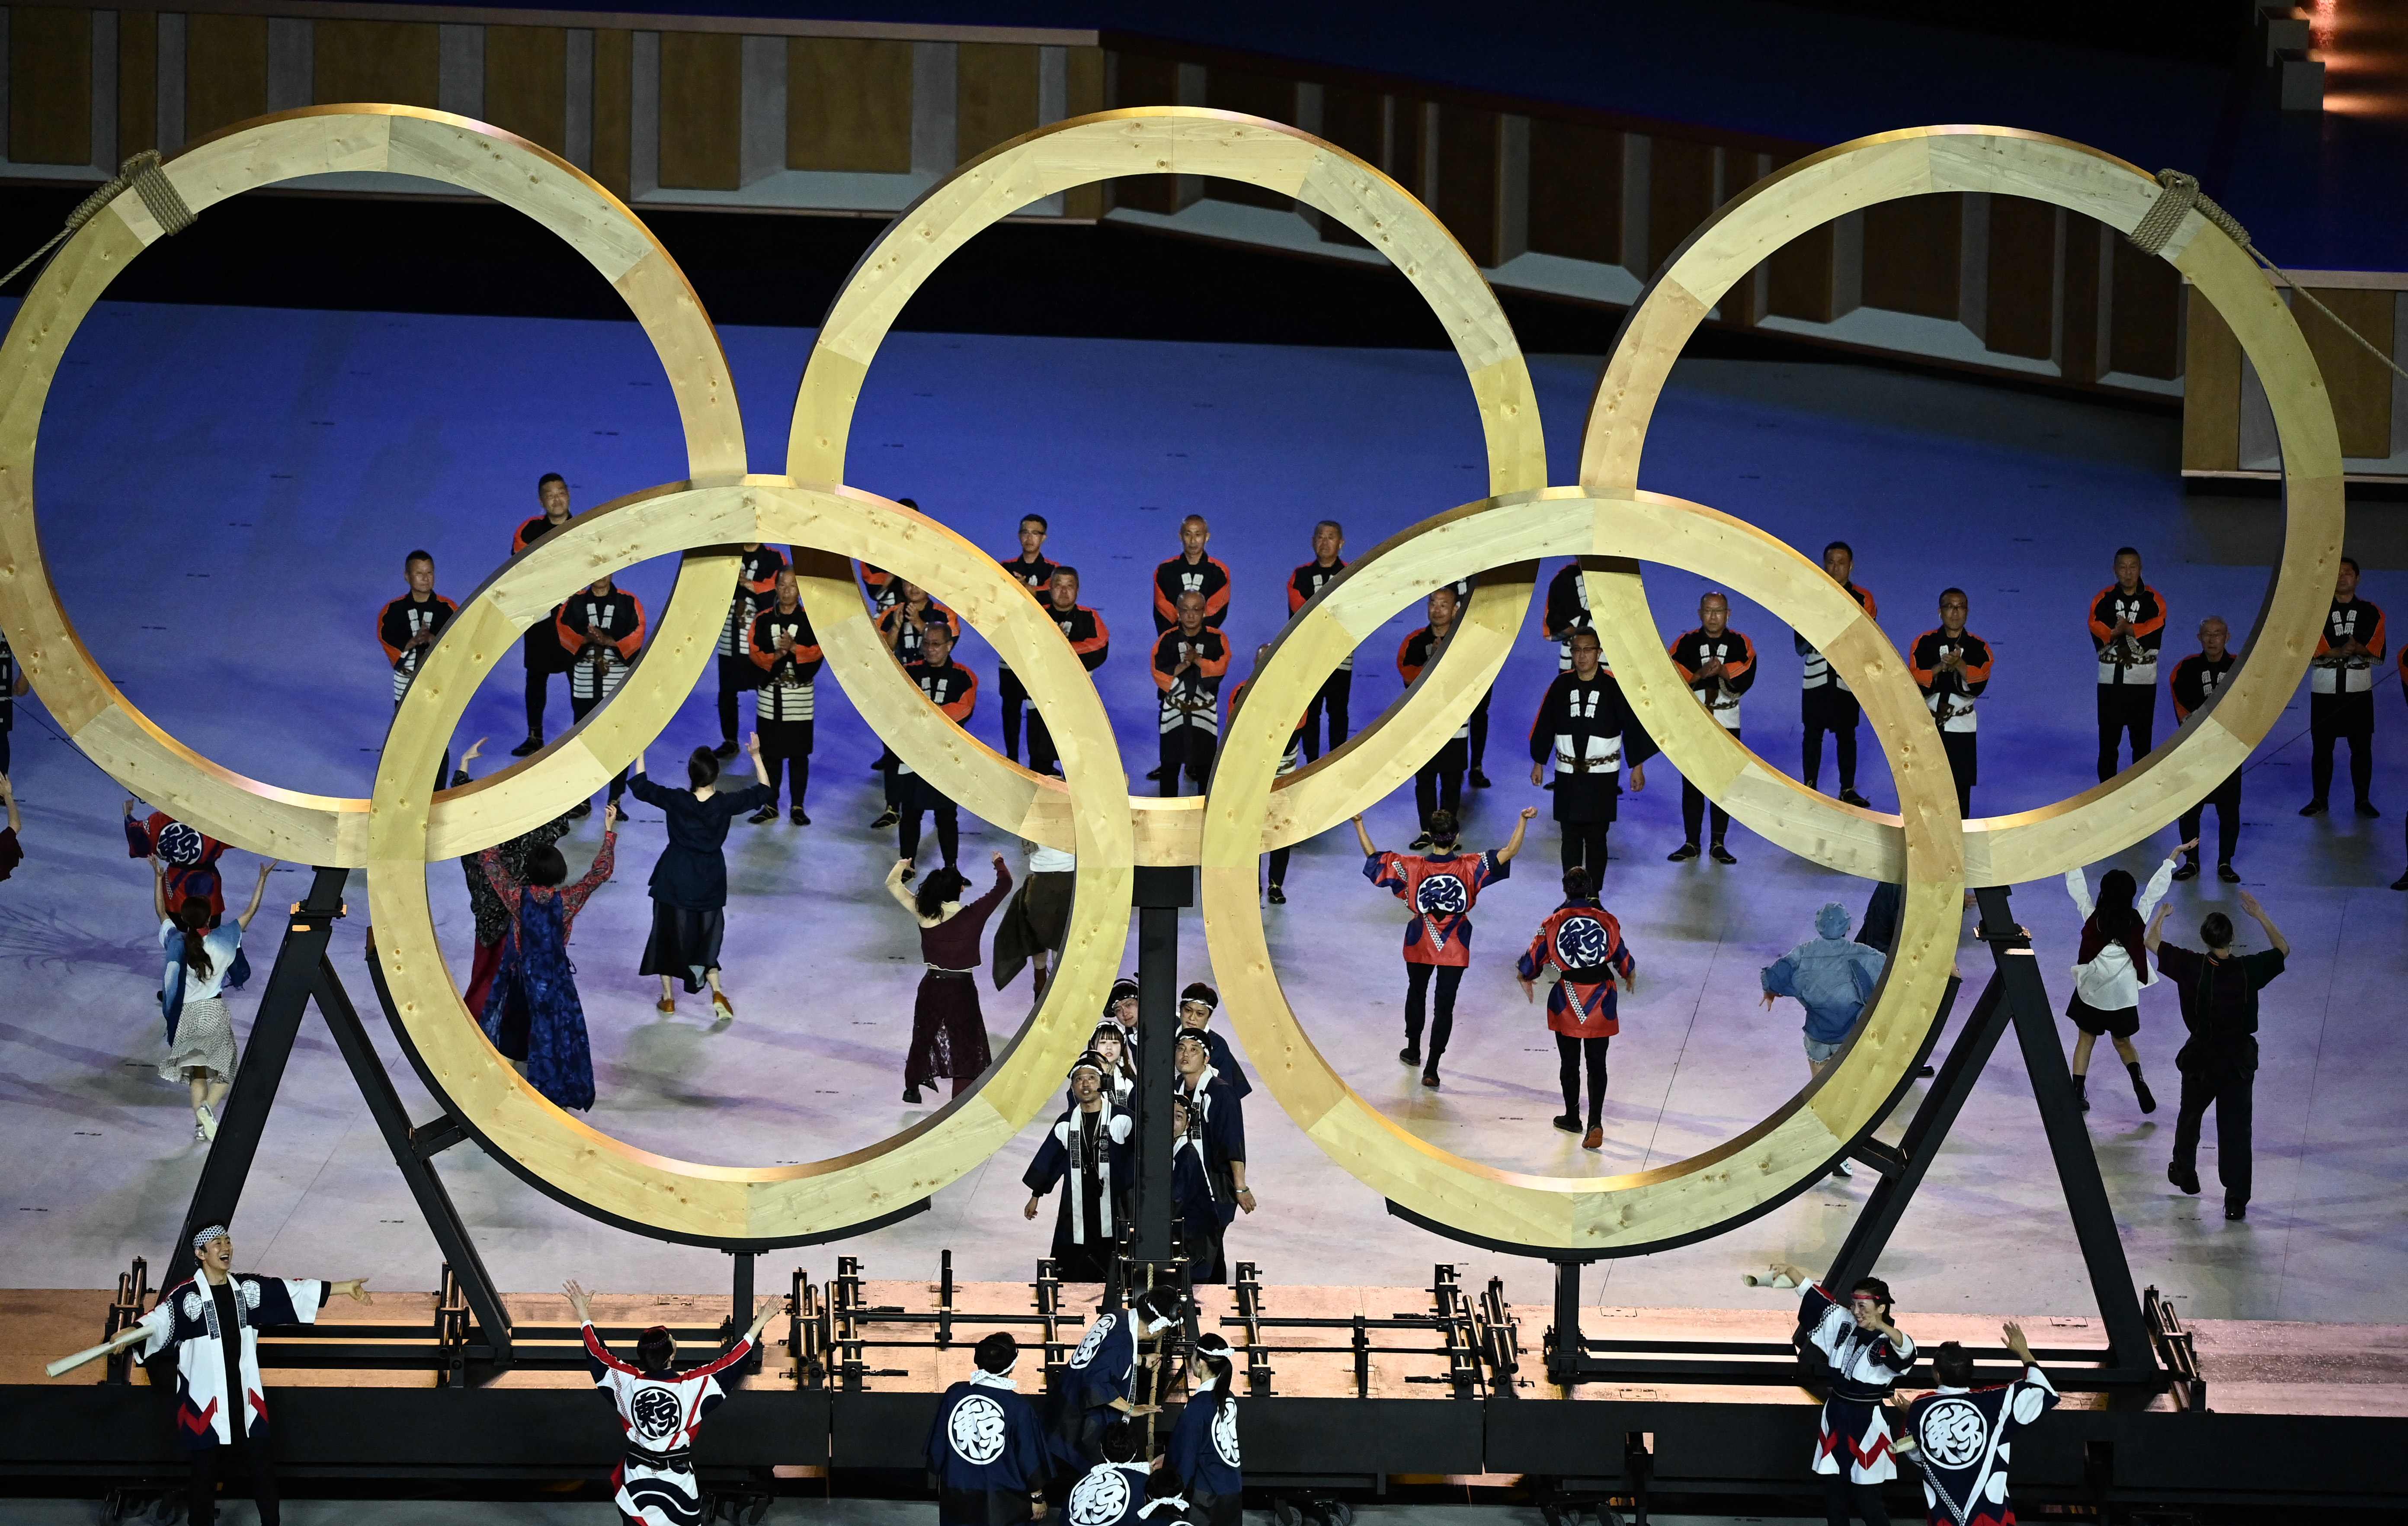 Russian TV shows doctored video of opening ceremony Olympic rings glitch -  Sports Illustrated